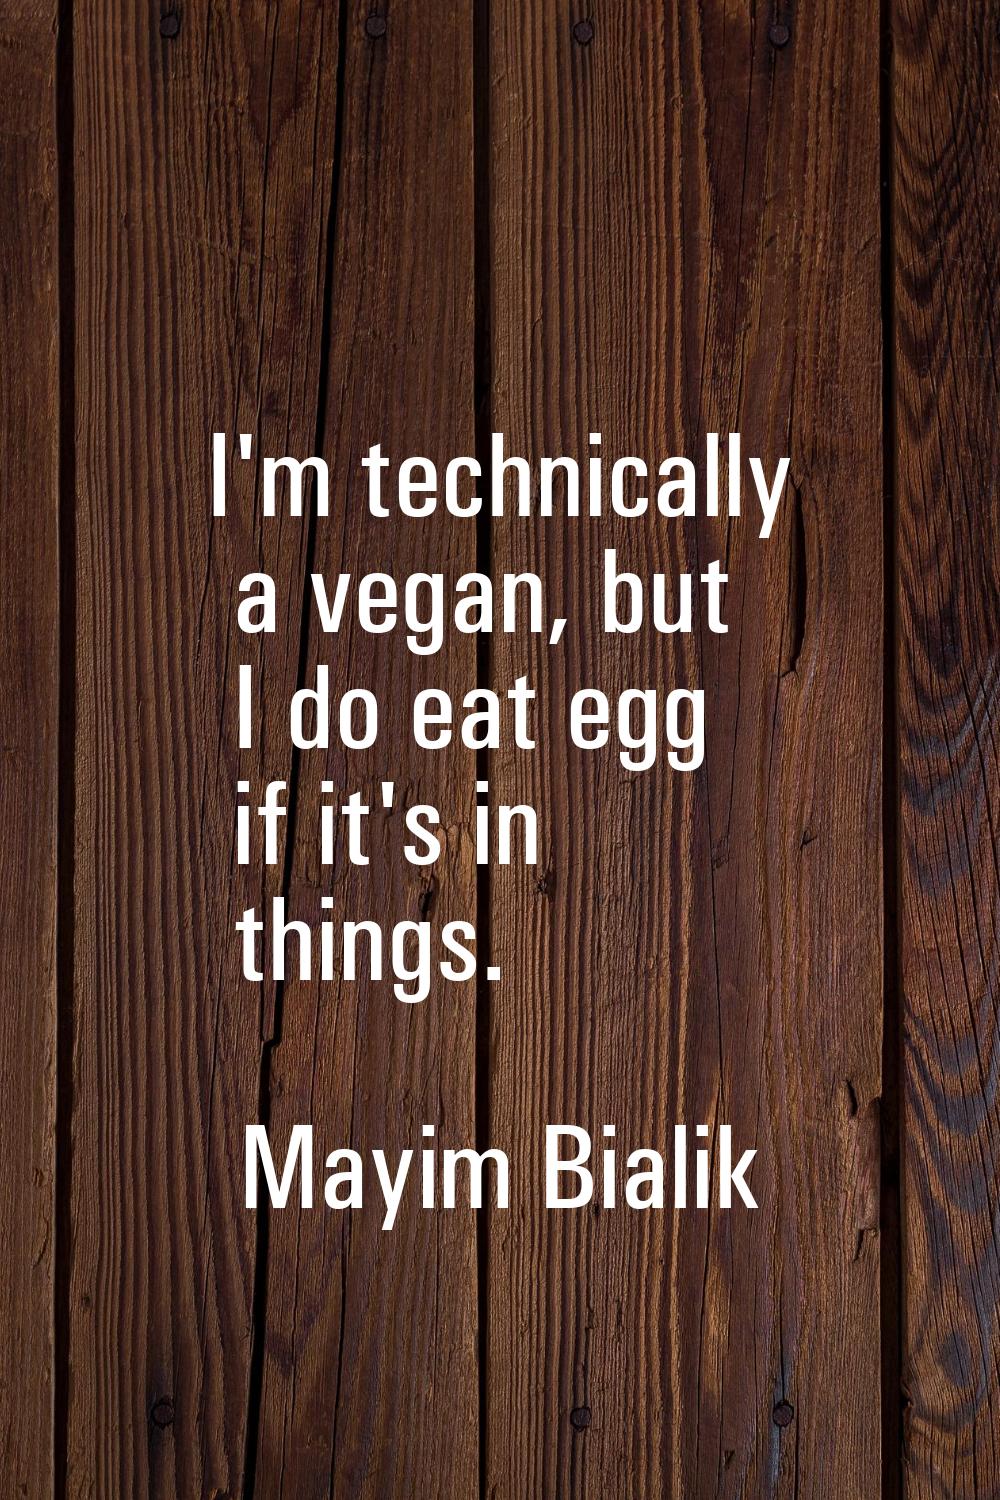 I'm technically a vegan, but I do eat egg if it's in things.